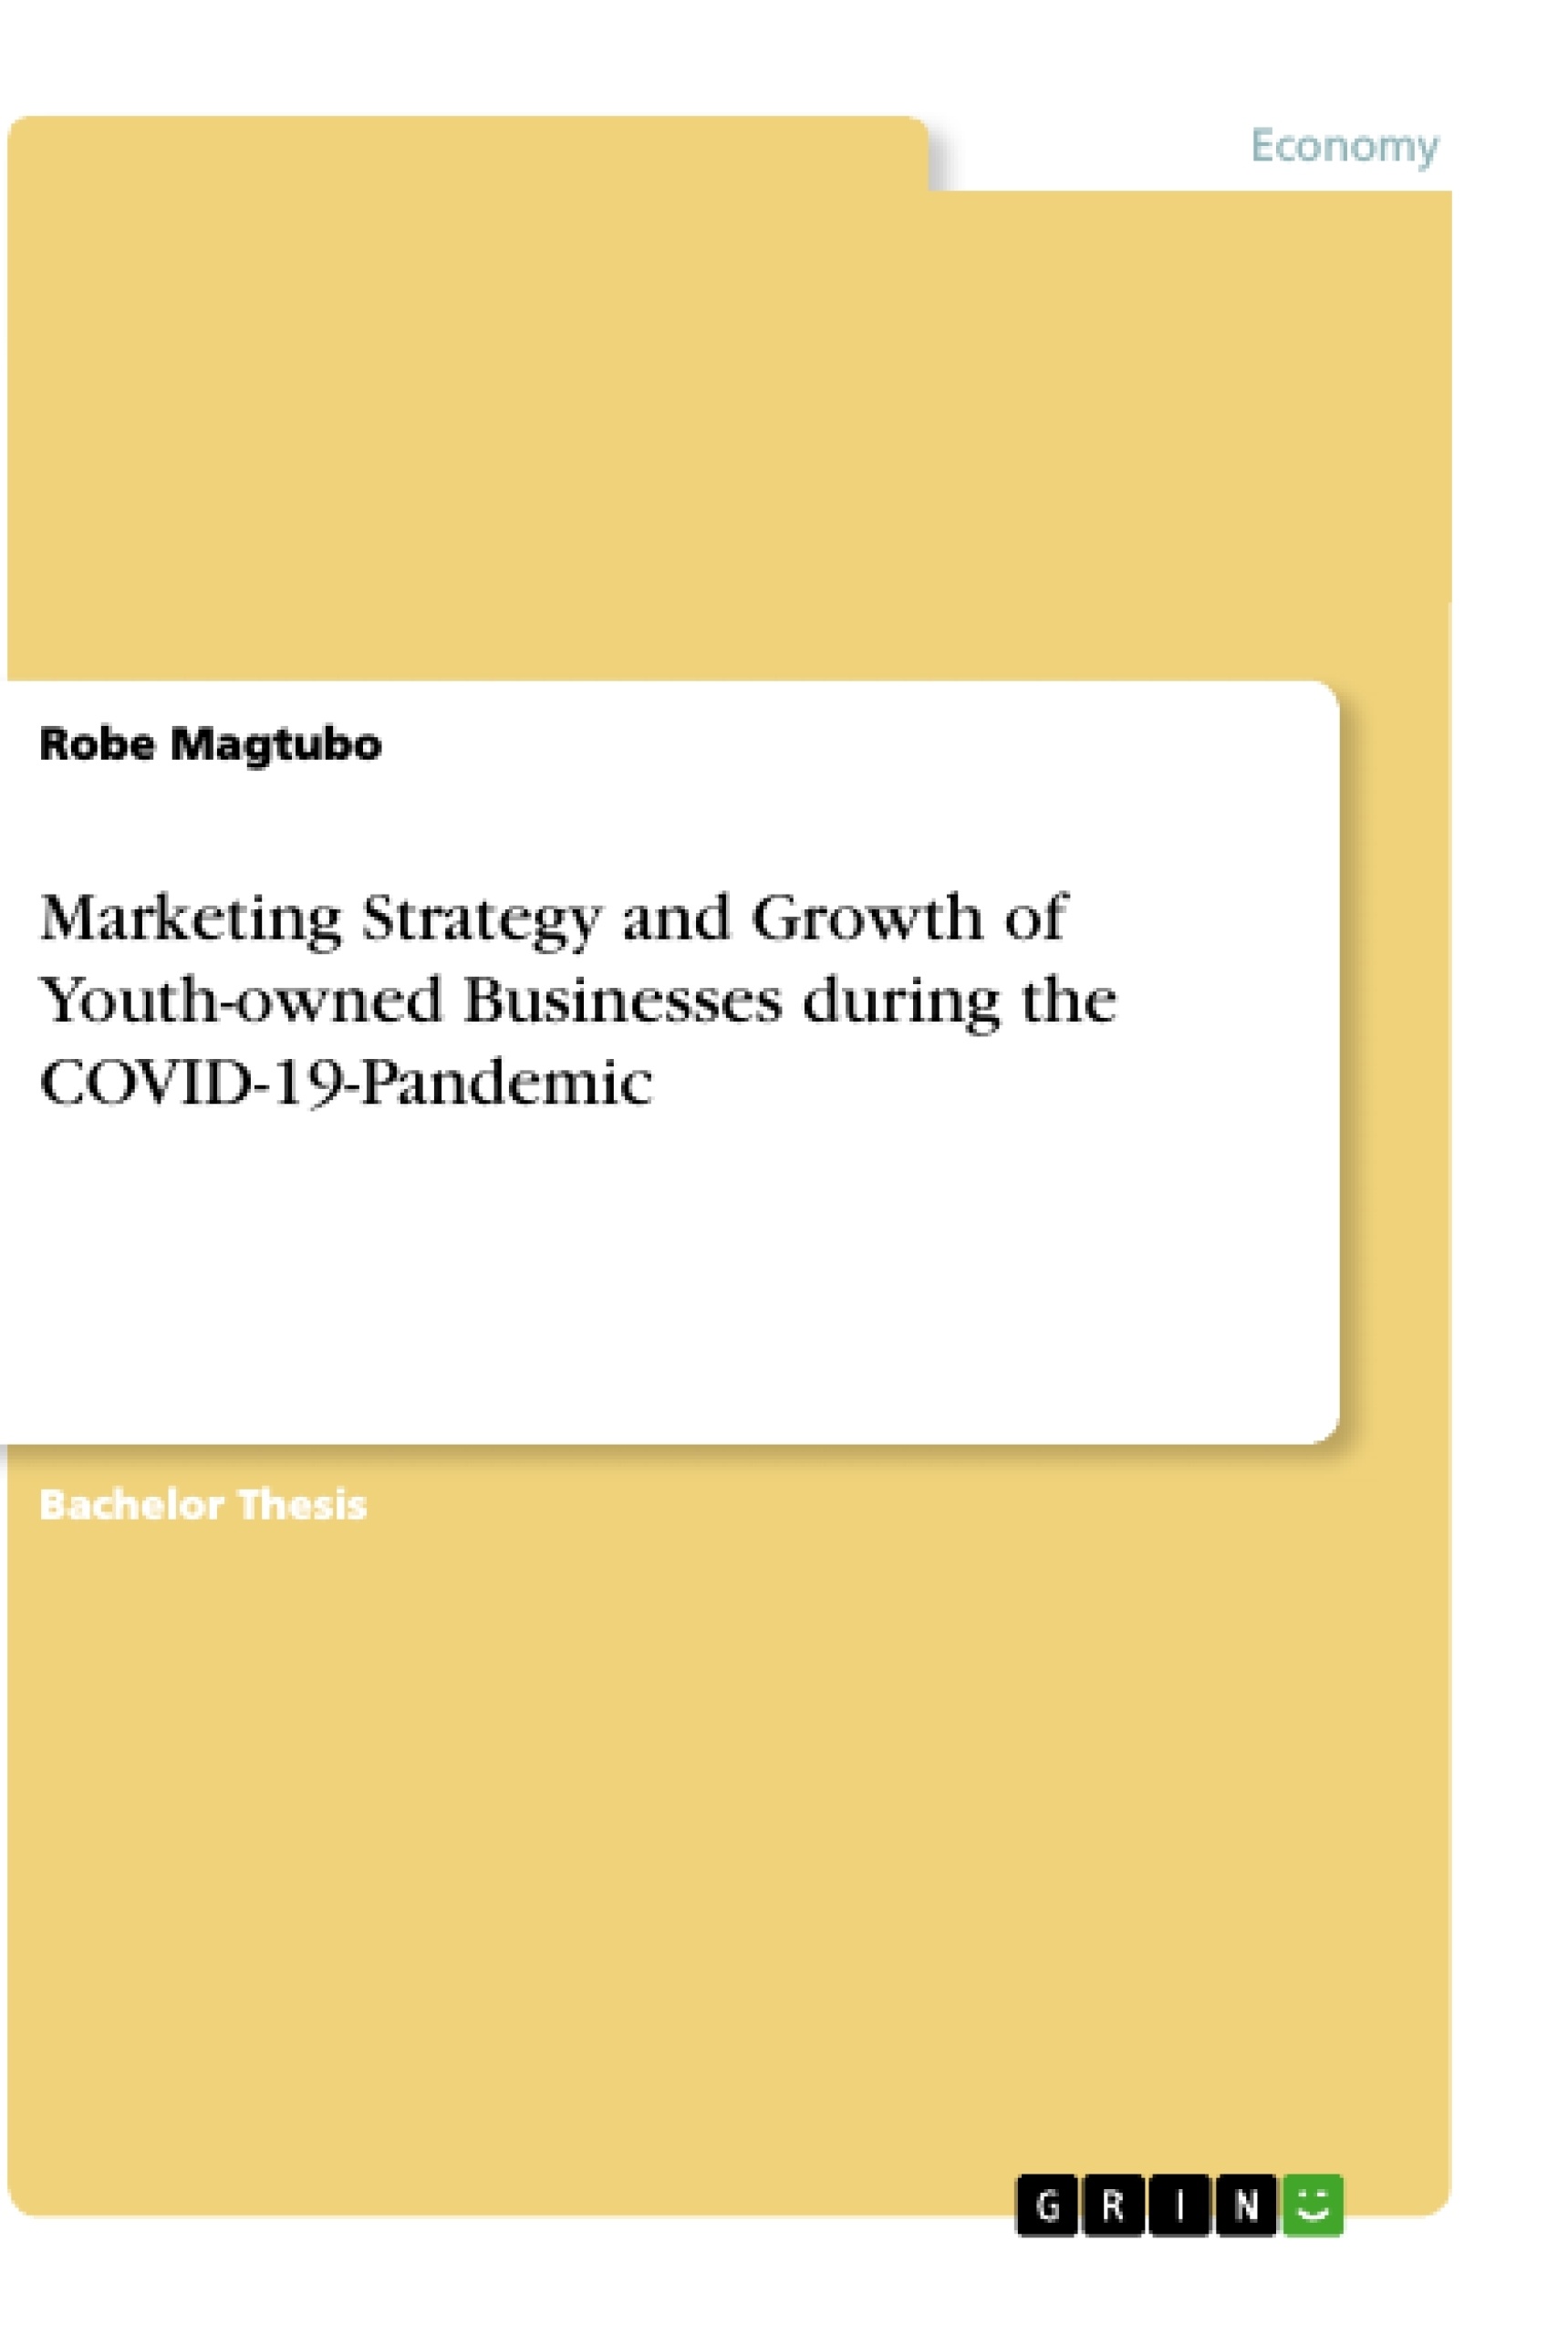 Title: Marketing Strategy and Growth of Youth-owned Businesses during the COVID-19-Pandemic